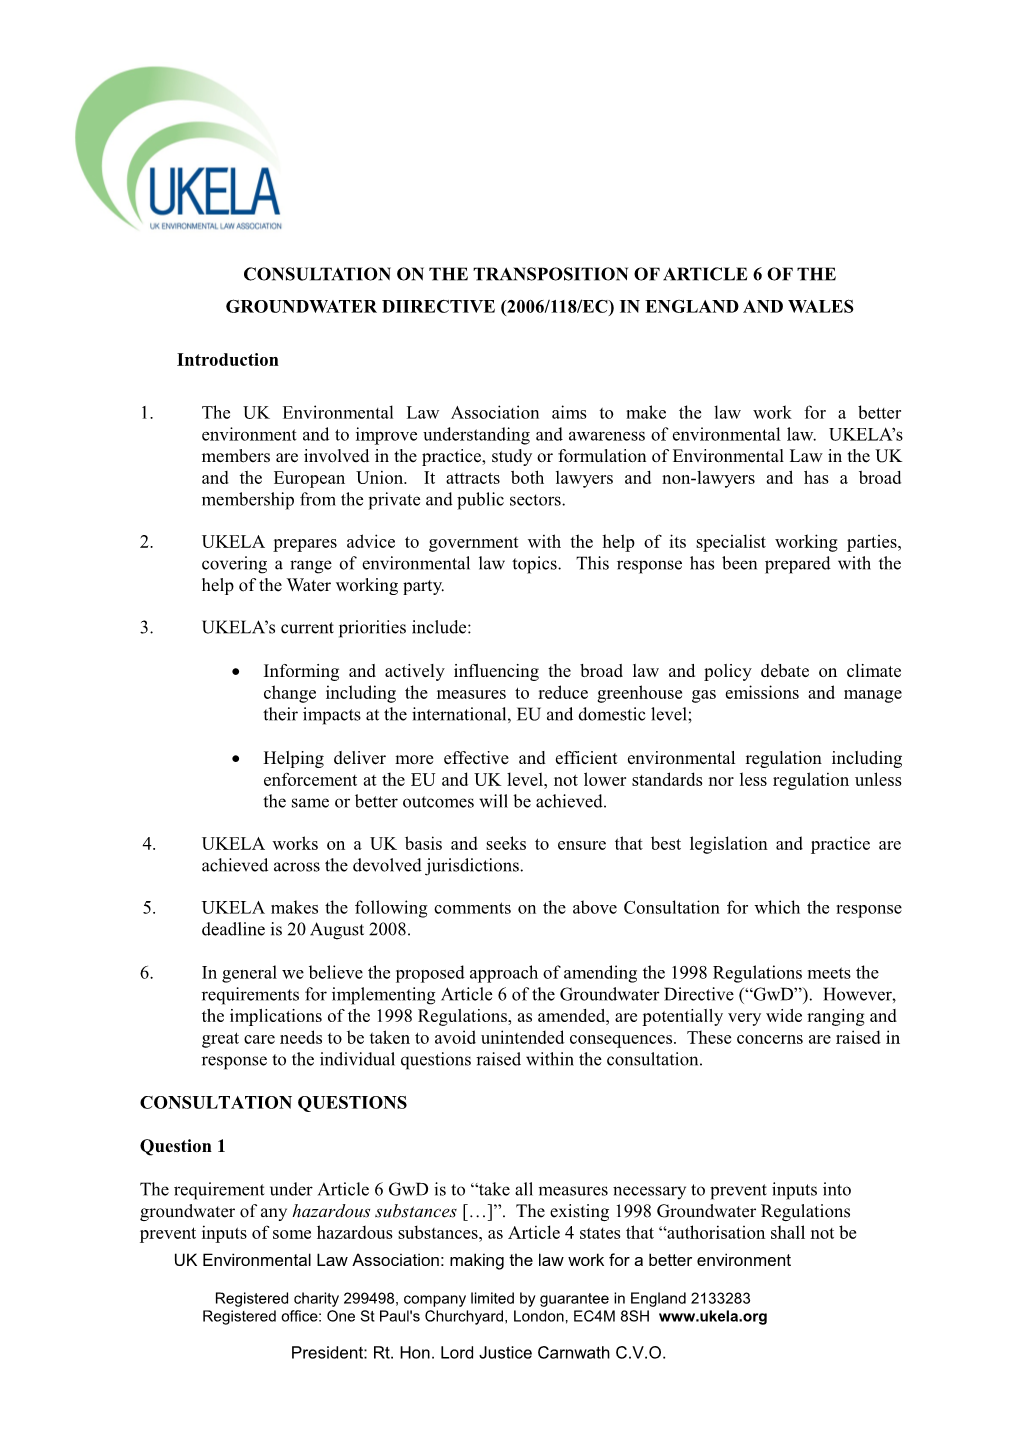 Consultation on the Transposition of Article 6 of the Groundwater Diirective (2006/118/Ec)